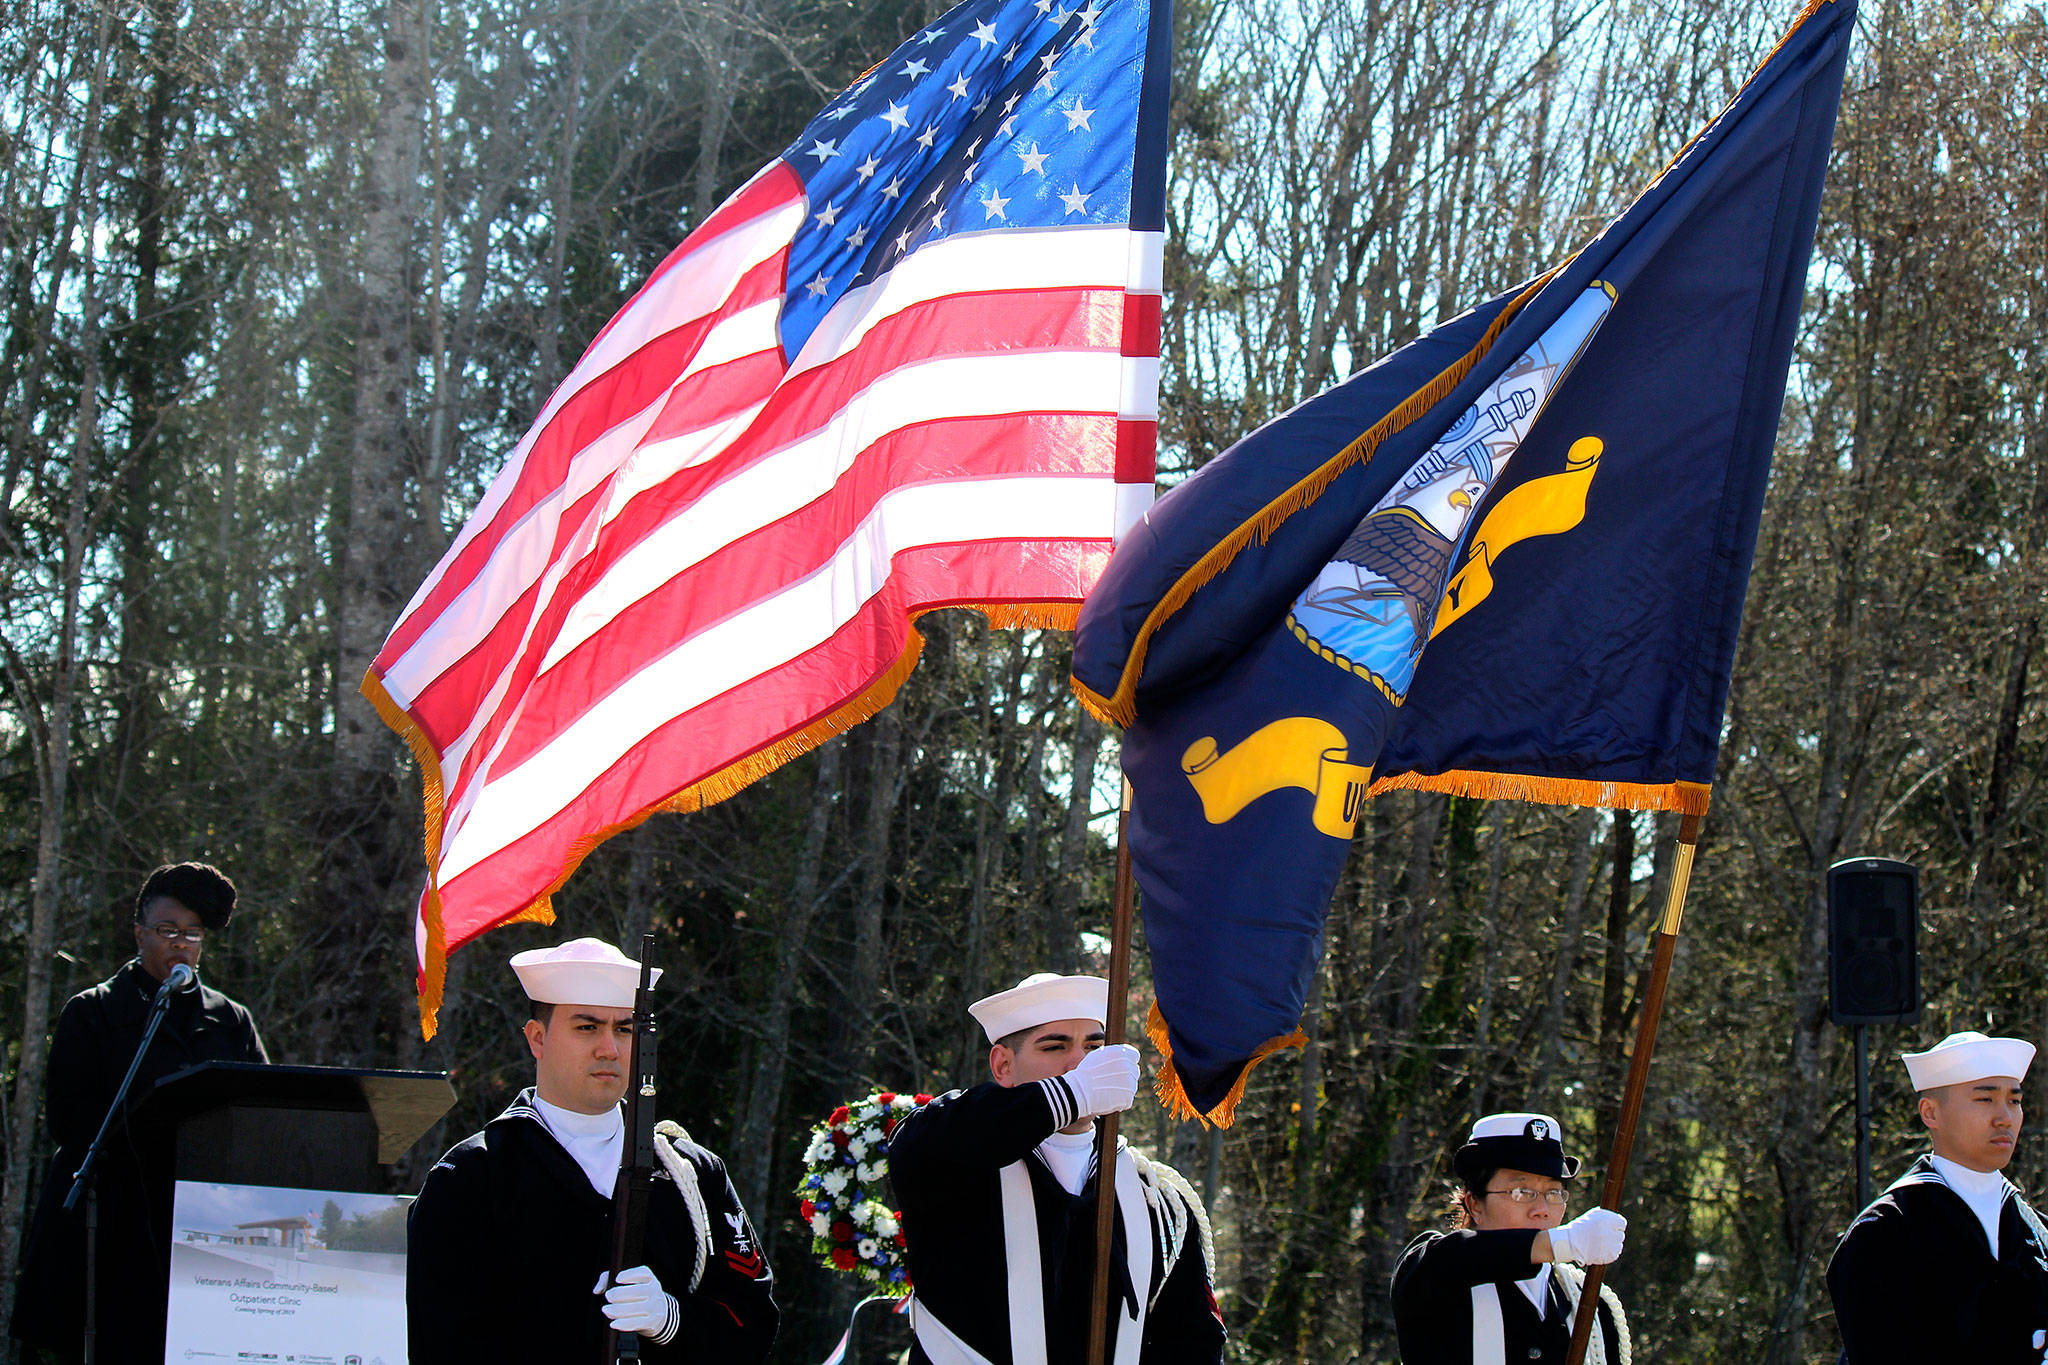 The color guard from the Intermediate Maintenance Facility in Bangor displays the colors while Niki Saulsberry sings the national anthem at the groundbreaking ceremony April 2.                                Michelle Beahm / Kitsap News Group